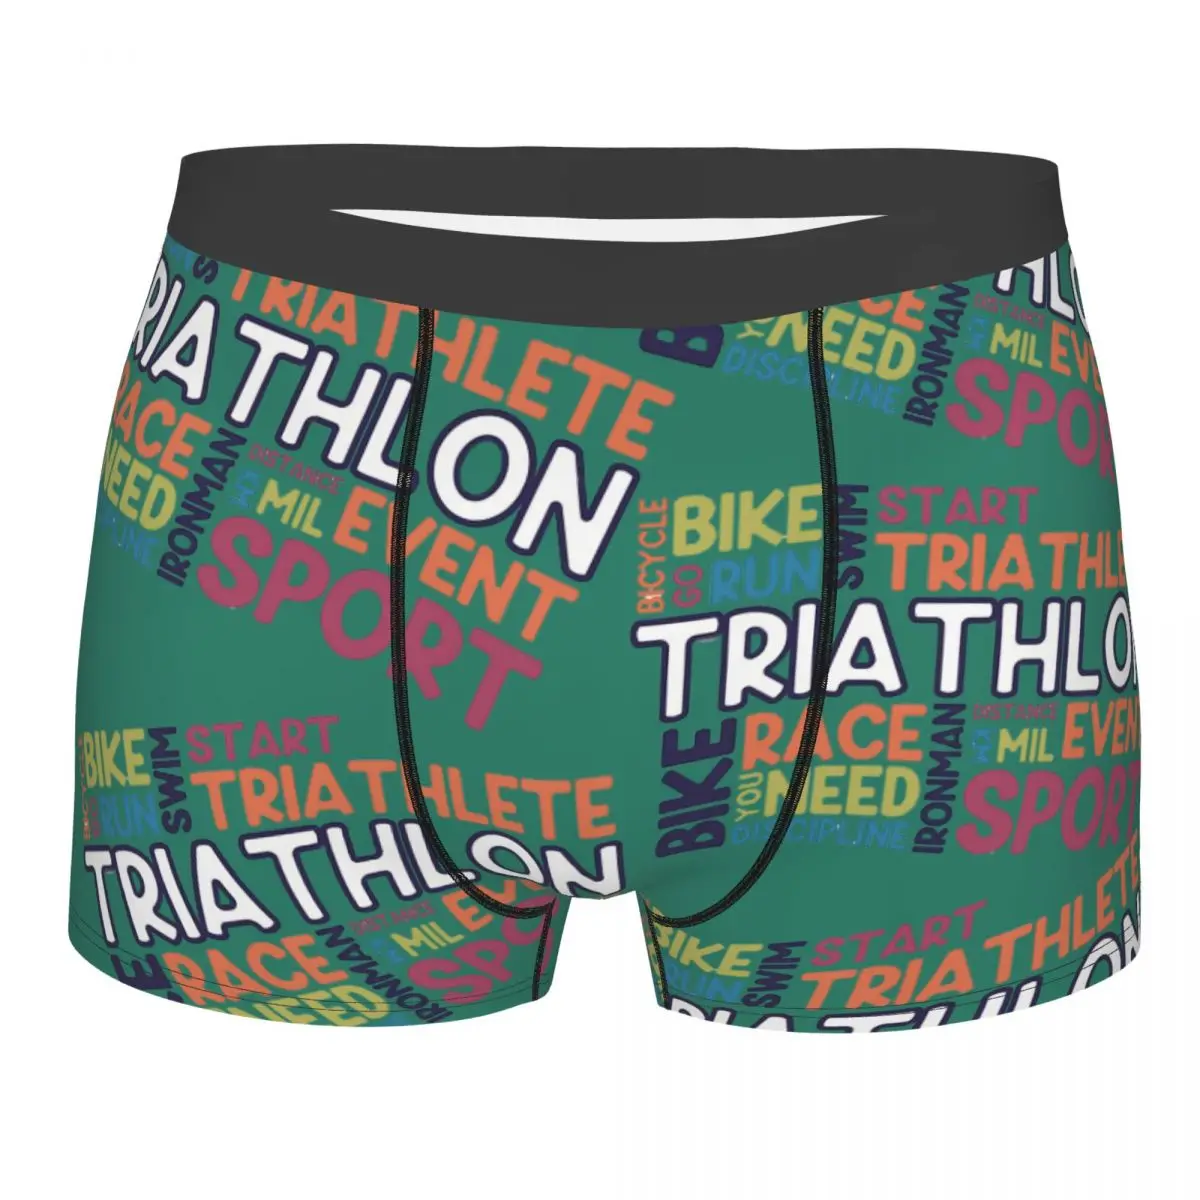 Triathlon Bucket Men Printed Boxer Briefs Underpants Triathlon All letters Highly Breathable Top Quality Birthday Gifts